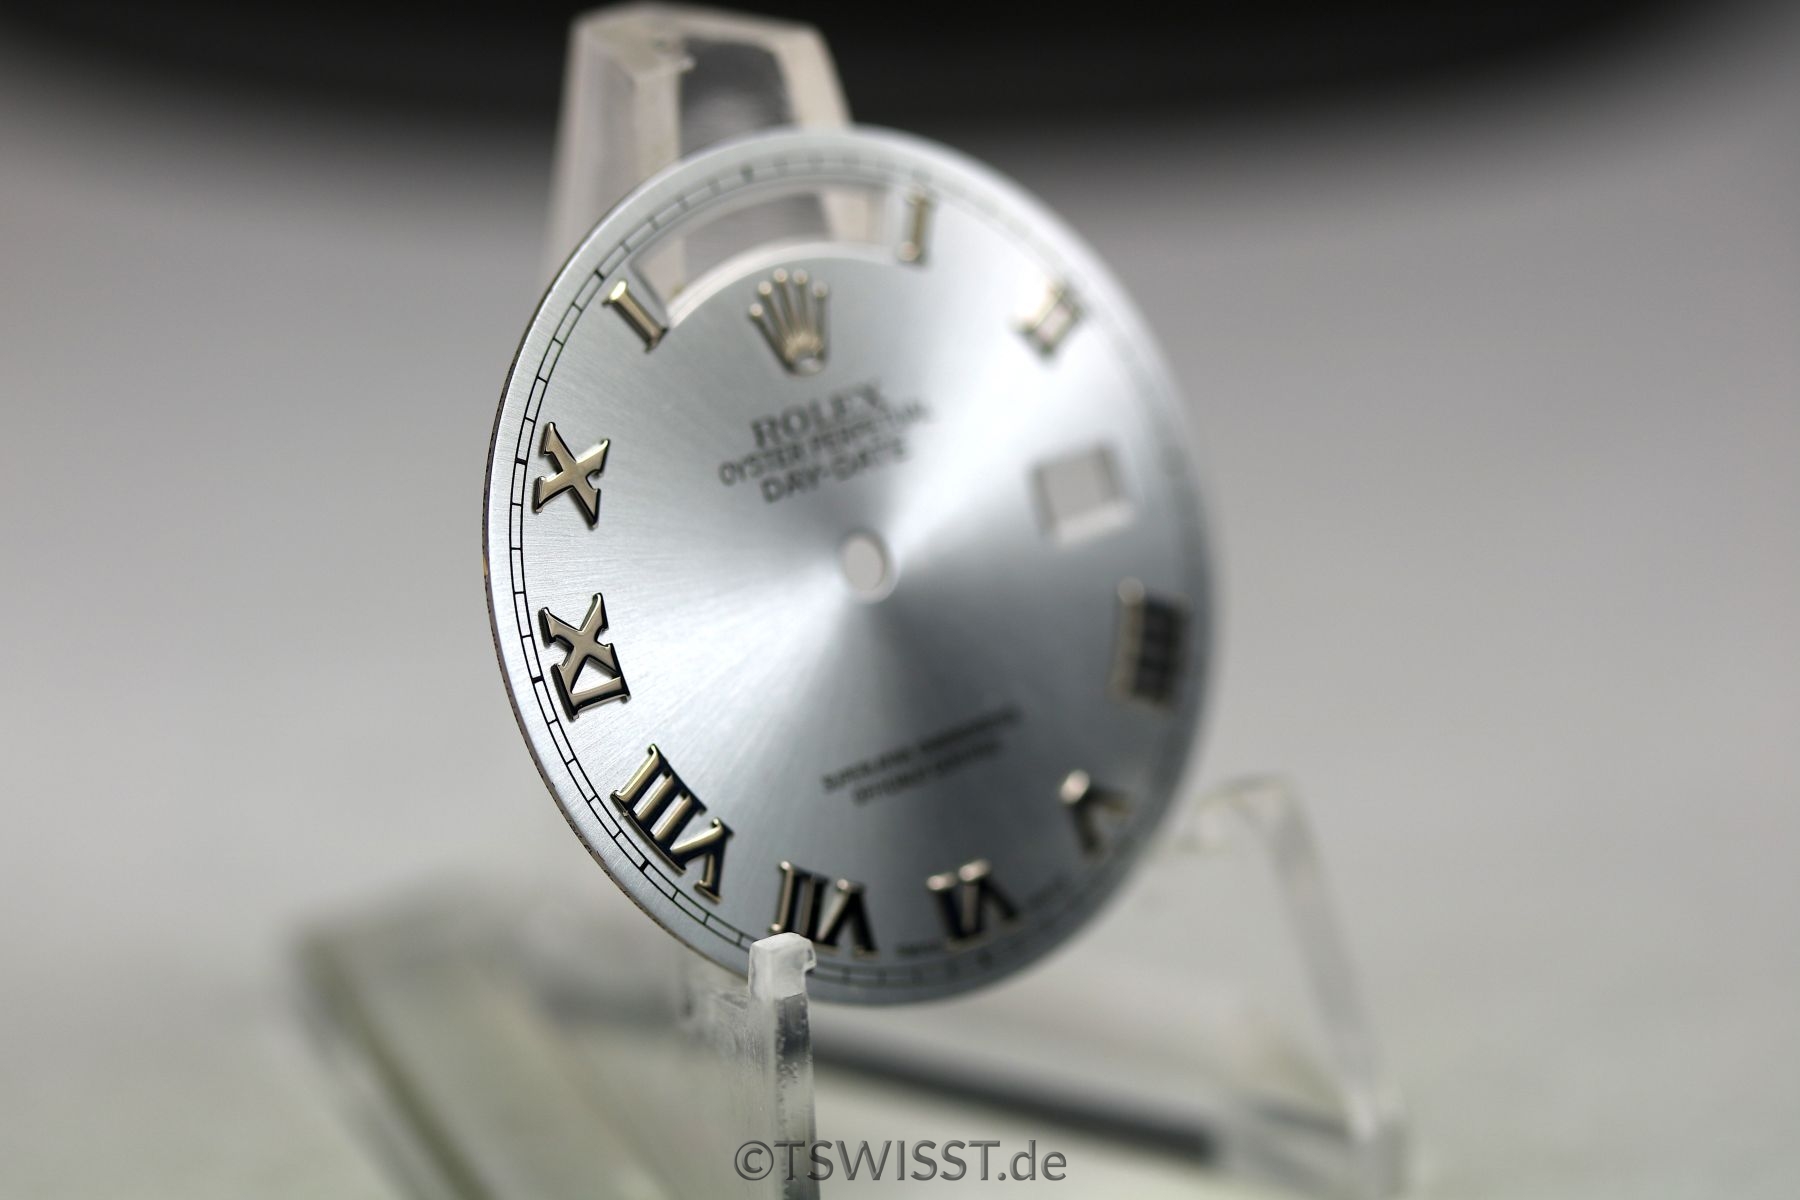 Rolex Day-date dial